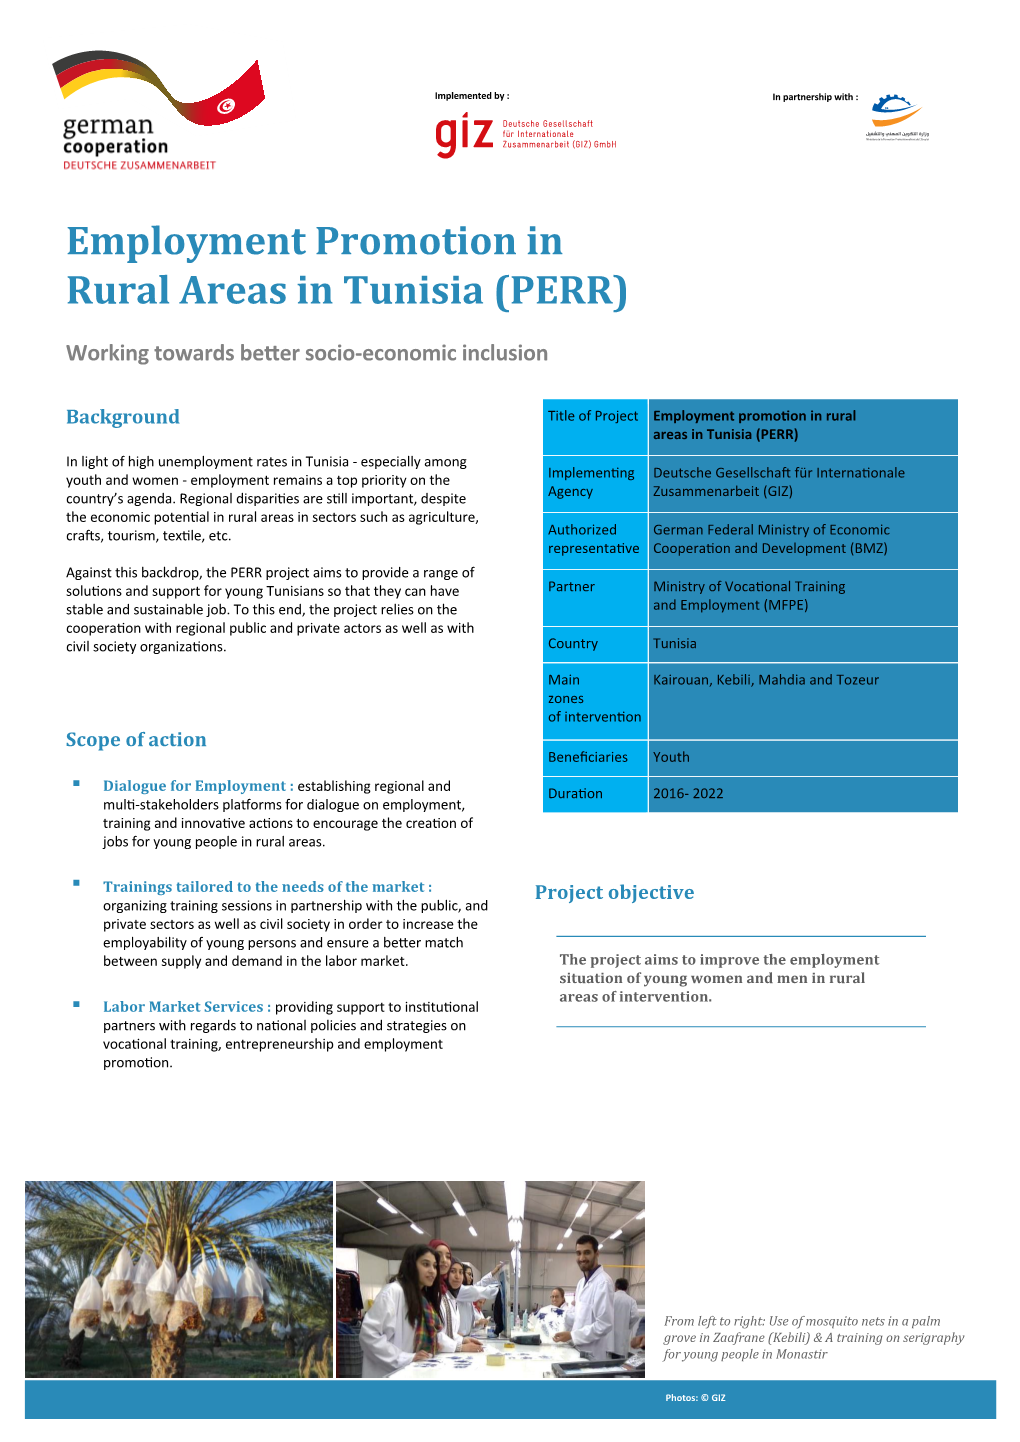 Employment Promotion in Rural Areas in Tunisia (PERR)